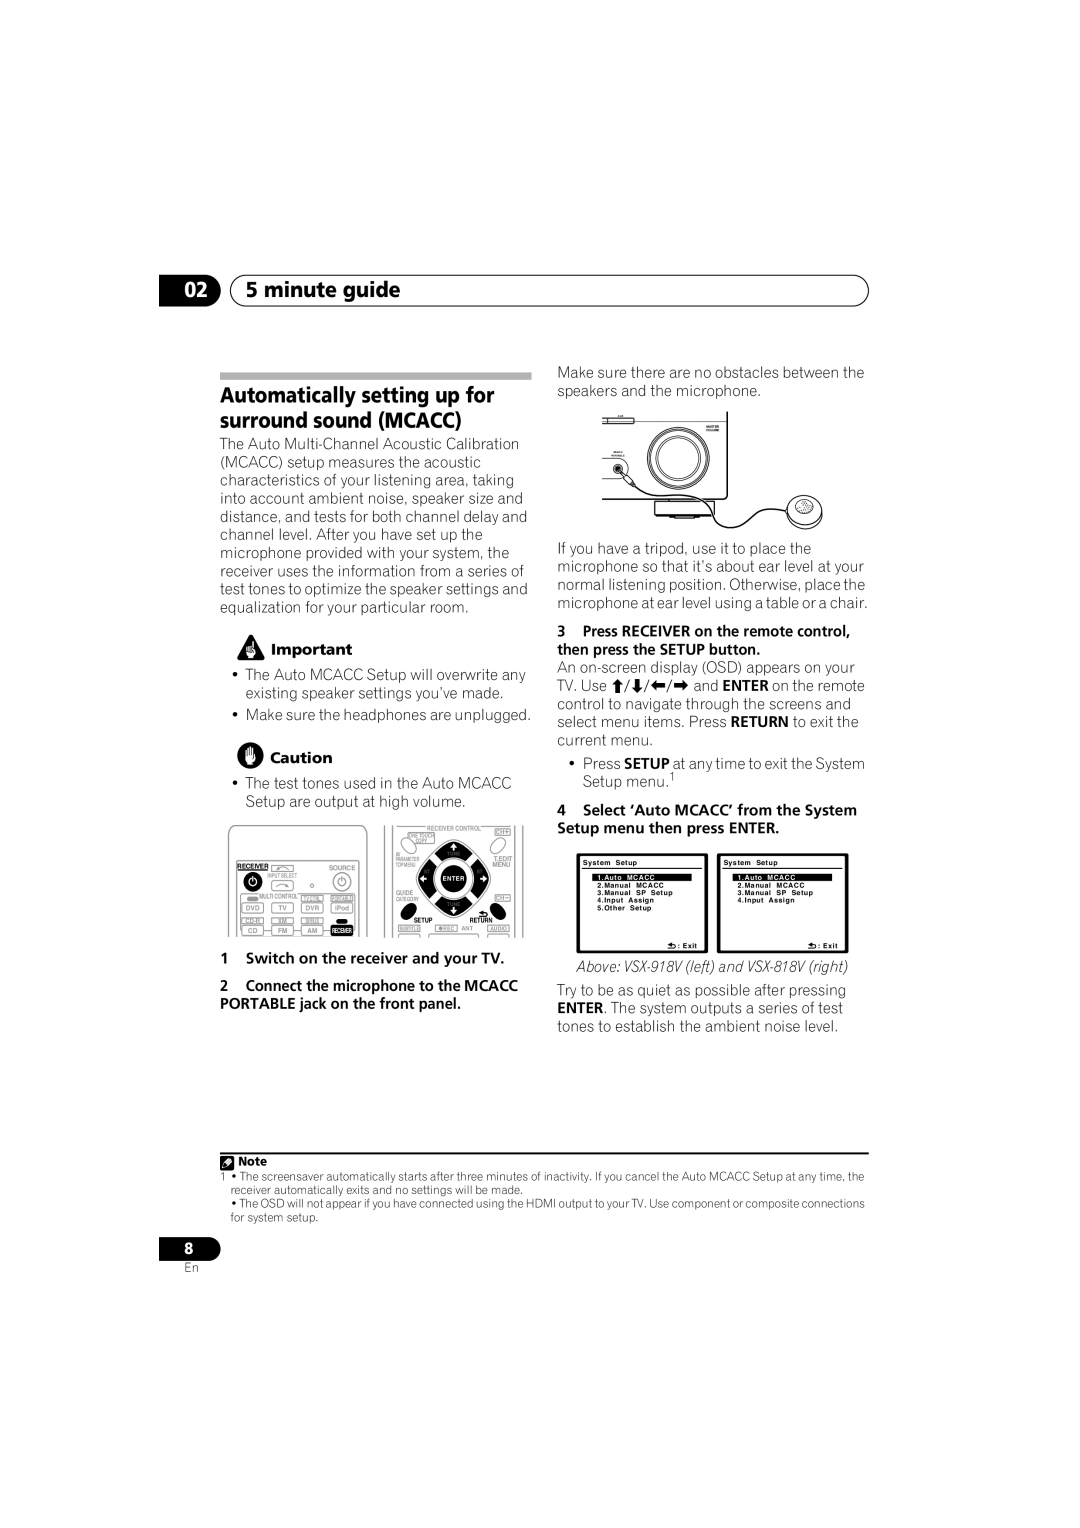 Pioneer VSX-918V, VSX-818V operating instructions 02 5 minute guide, Automatically setting up for surround sound MCACC 